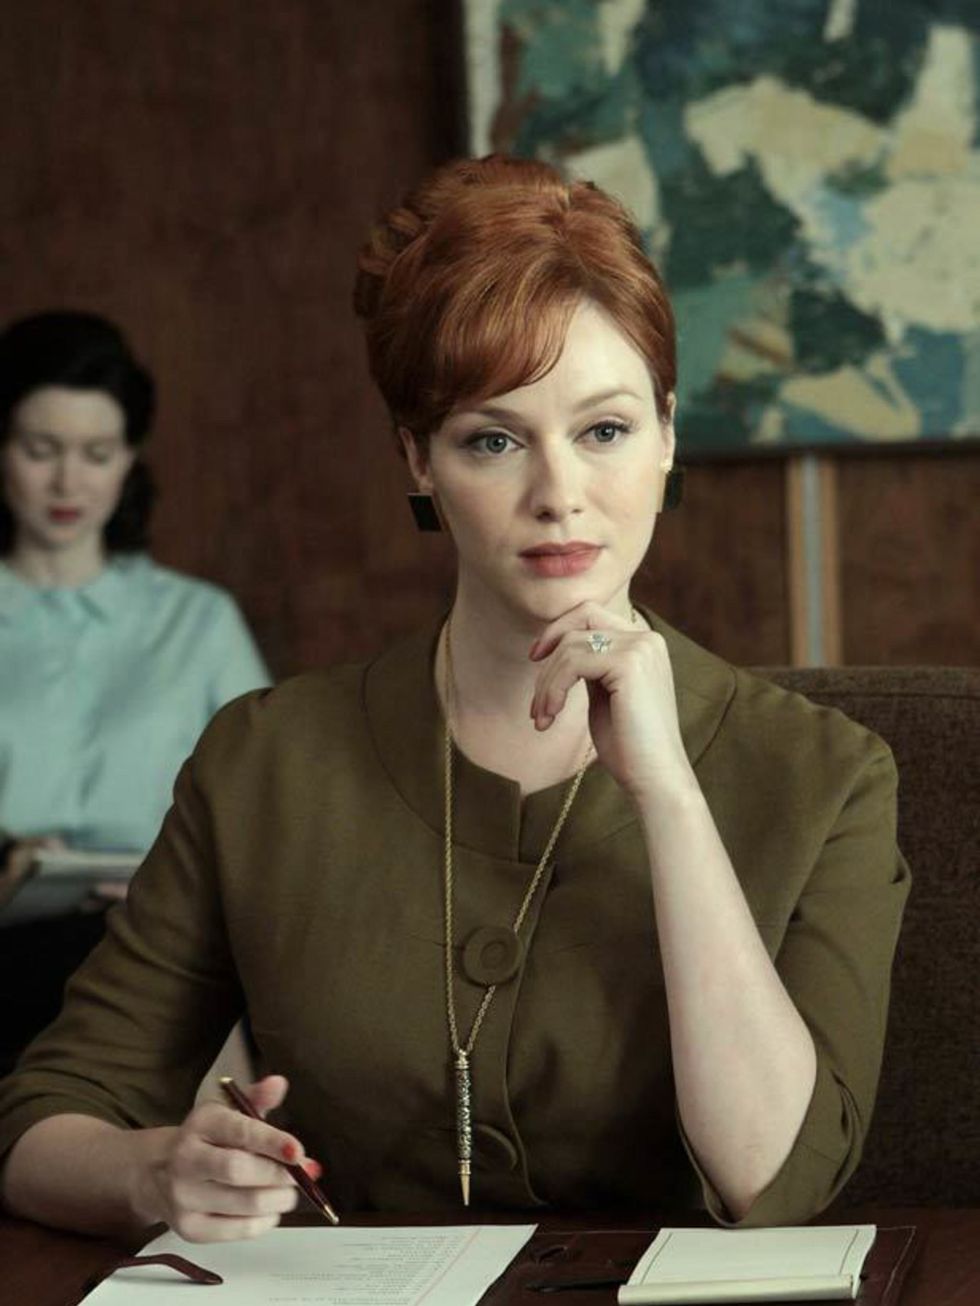 <p><a href="http://www.elleuk.com/content/search?SearchText=christina+hendricks&amp;SearchButton=Search">Christina Hendricks</a> character Joan Harris in a skirt-suit designed by Janie Bryant</p>